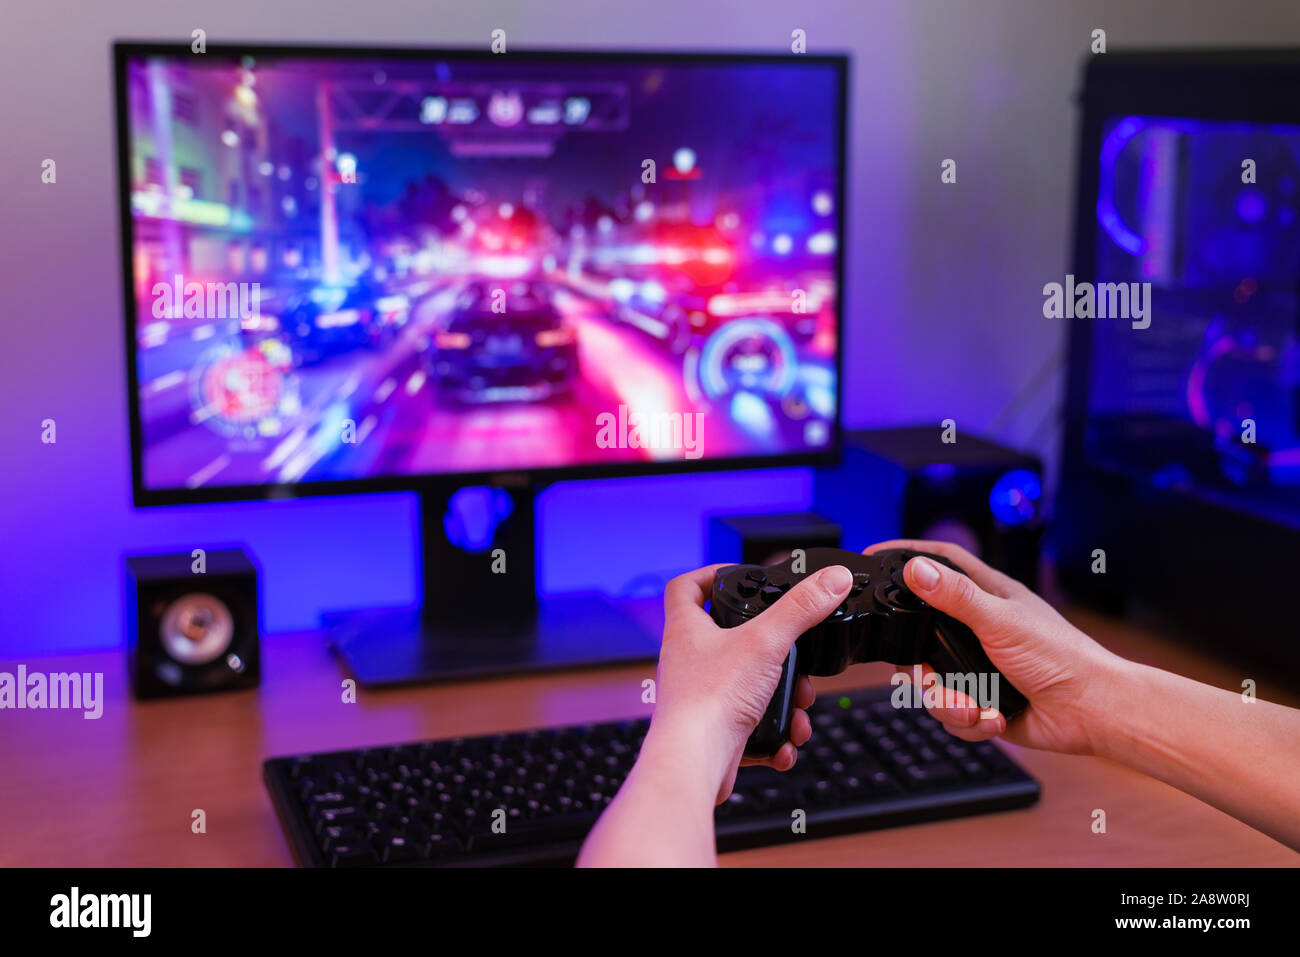 Playing racing games on computer concept. Hand holds the joystick. In the background is a gaming computer with RGB light. Stock Photo